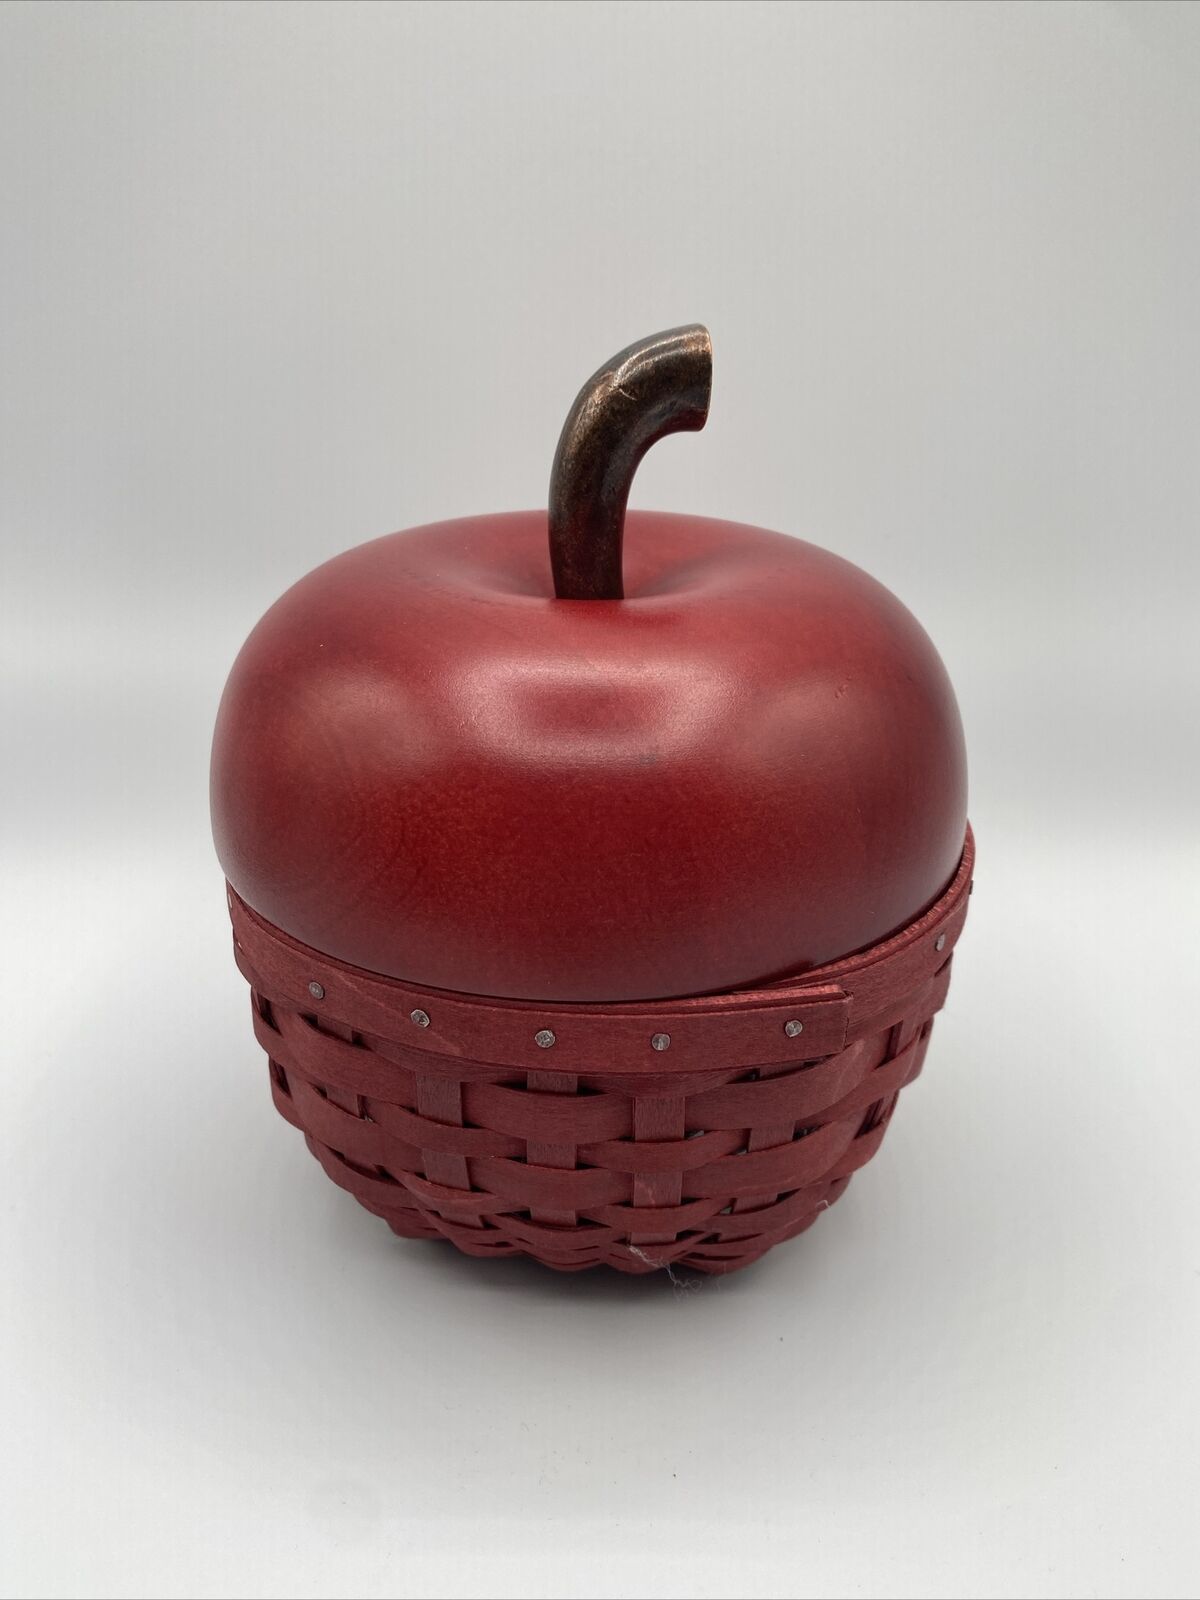 Rare Longaberger 2007 Collectors Club Red Apple Basket - Highly Collectible